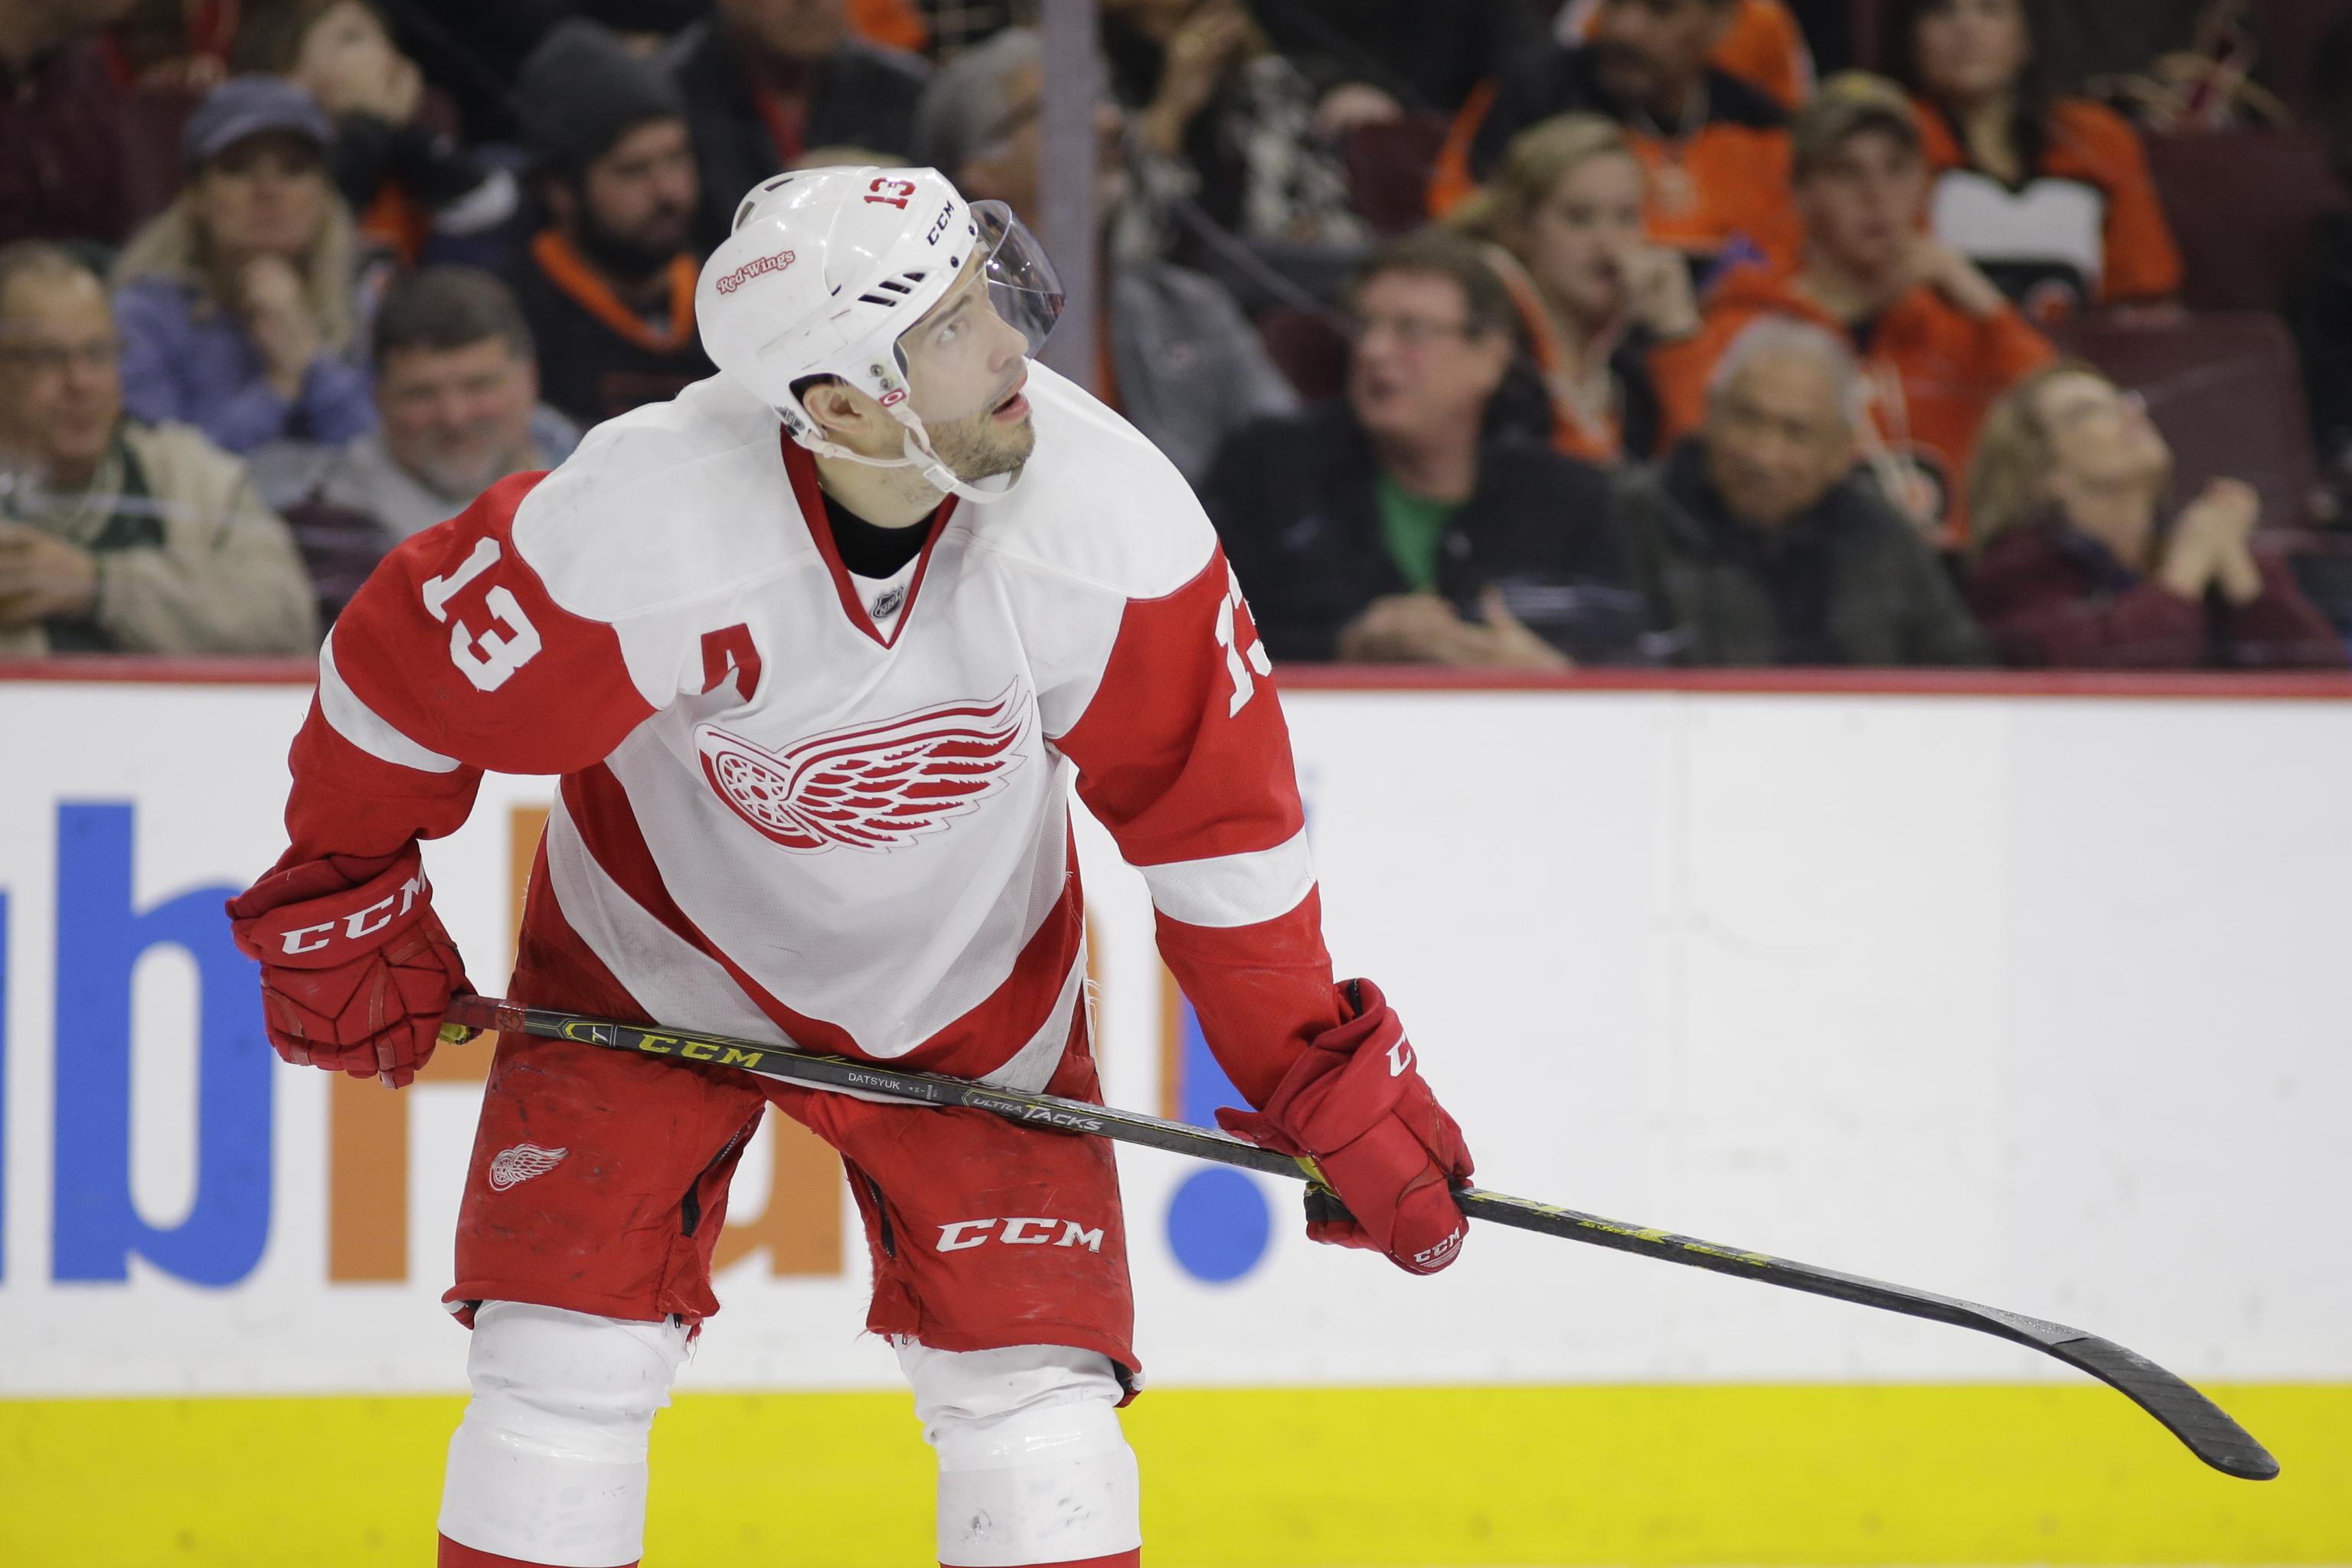 Report: Datsyuk's future undecided, could return to NHL